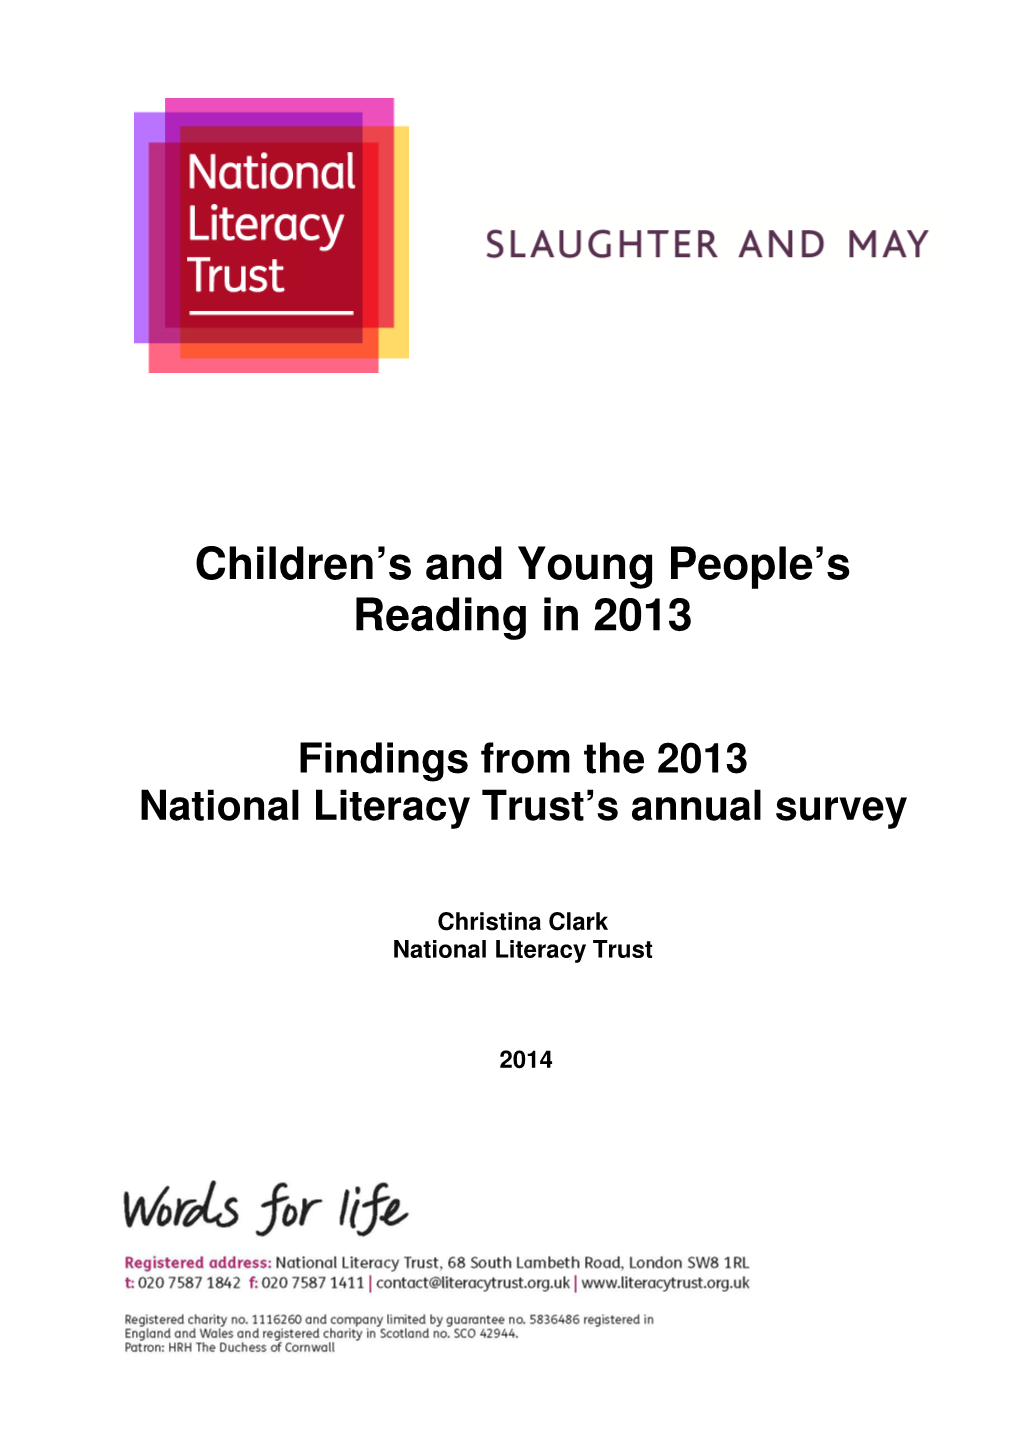 Children's and Young People's Reading in 2013